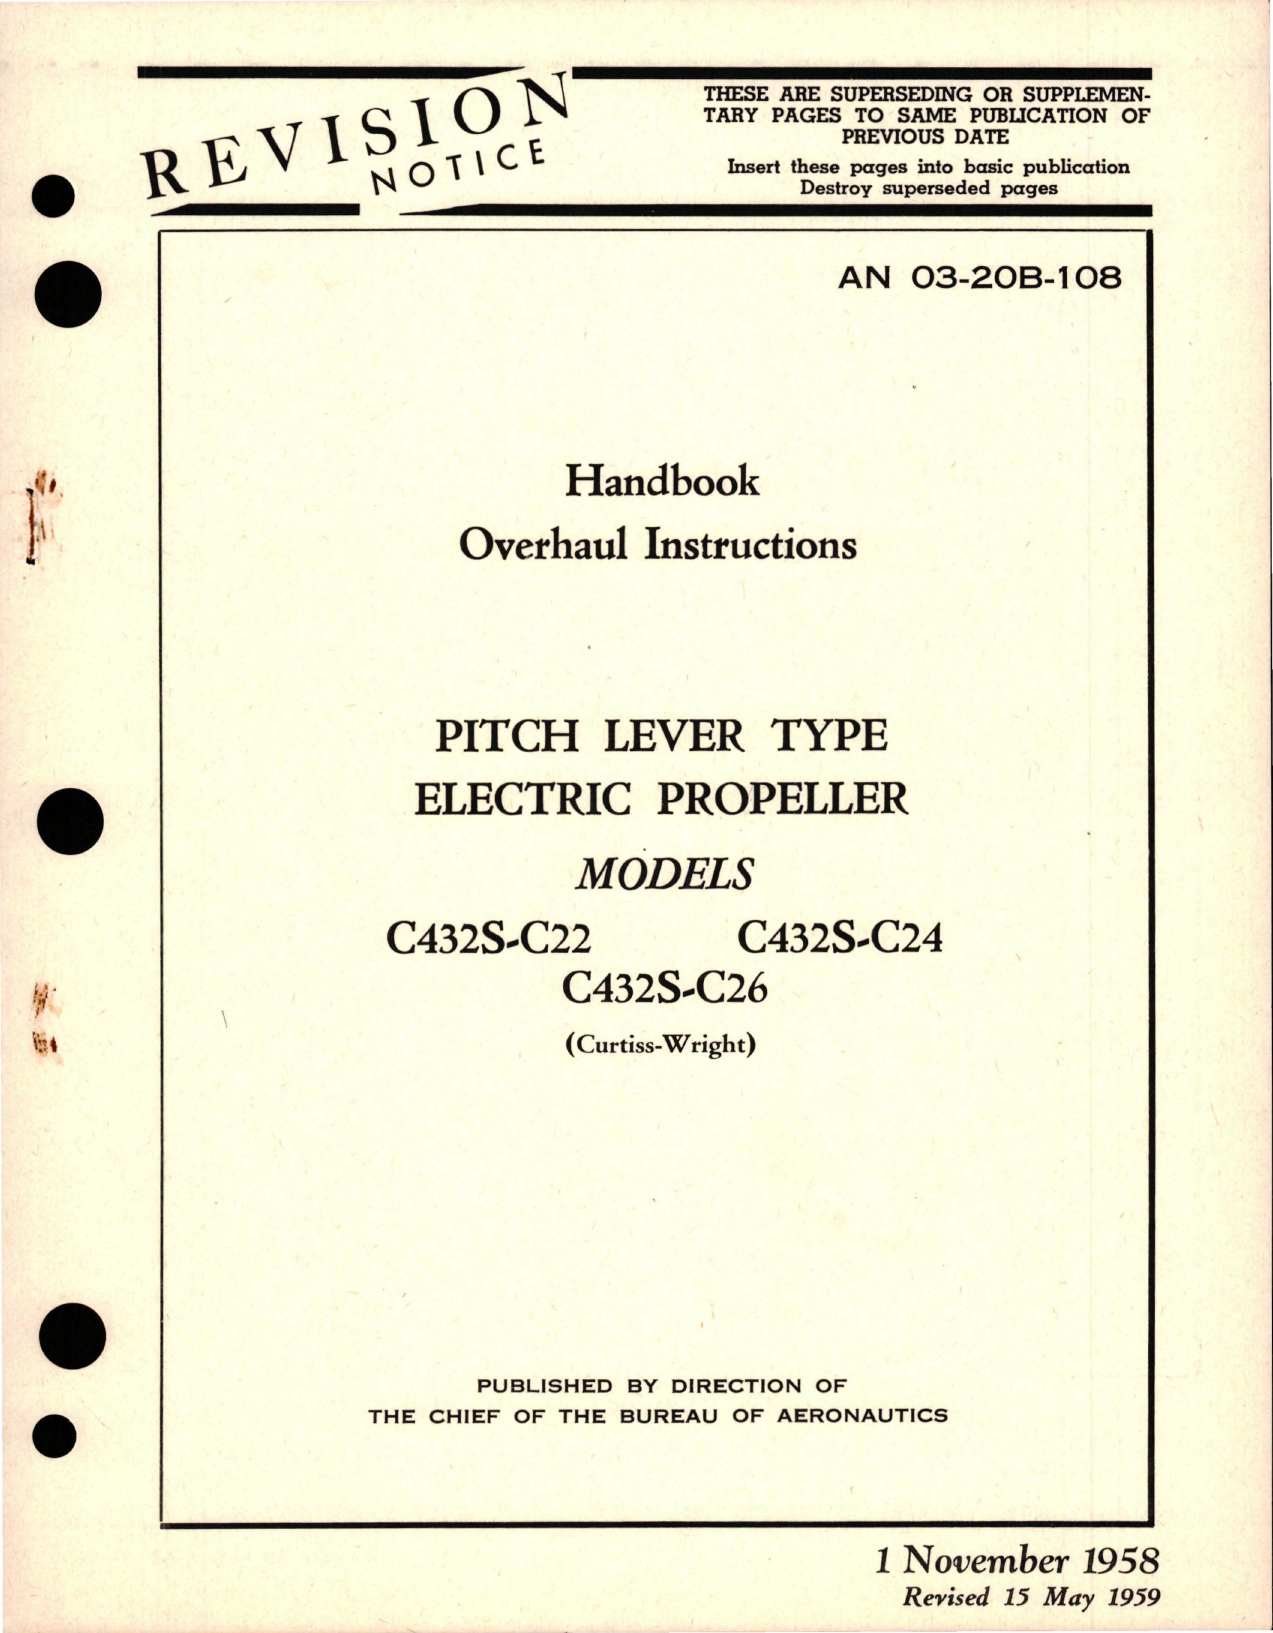 Sample page 1 from AirCorps Library document: Overhaul Instructions for Pitch Lever Type Electric Propeller - Models C432S-C22, C432S-C24, C432S-C26